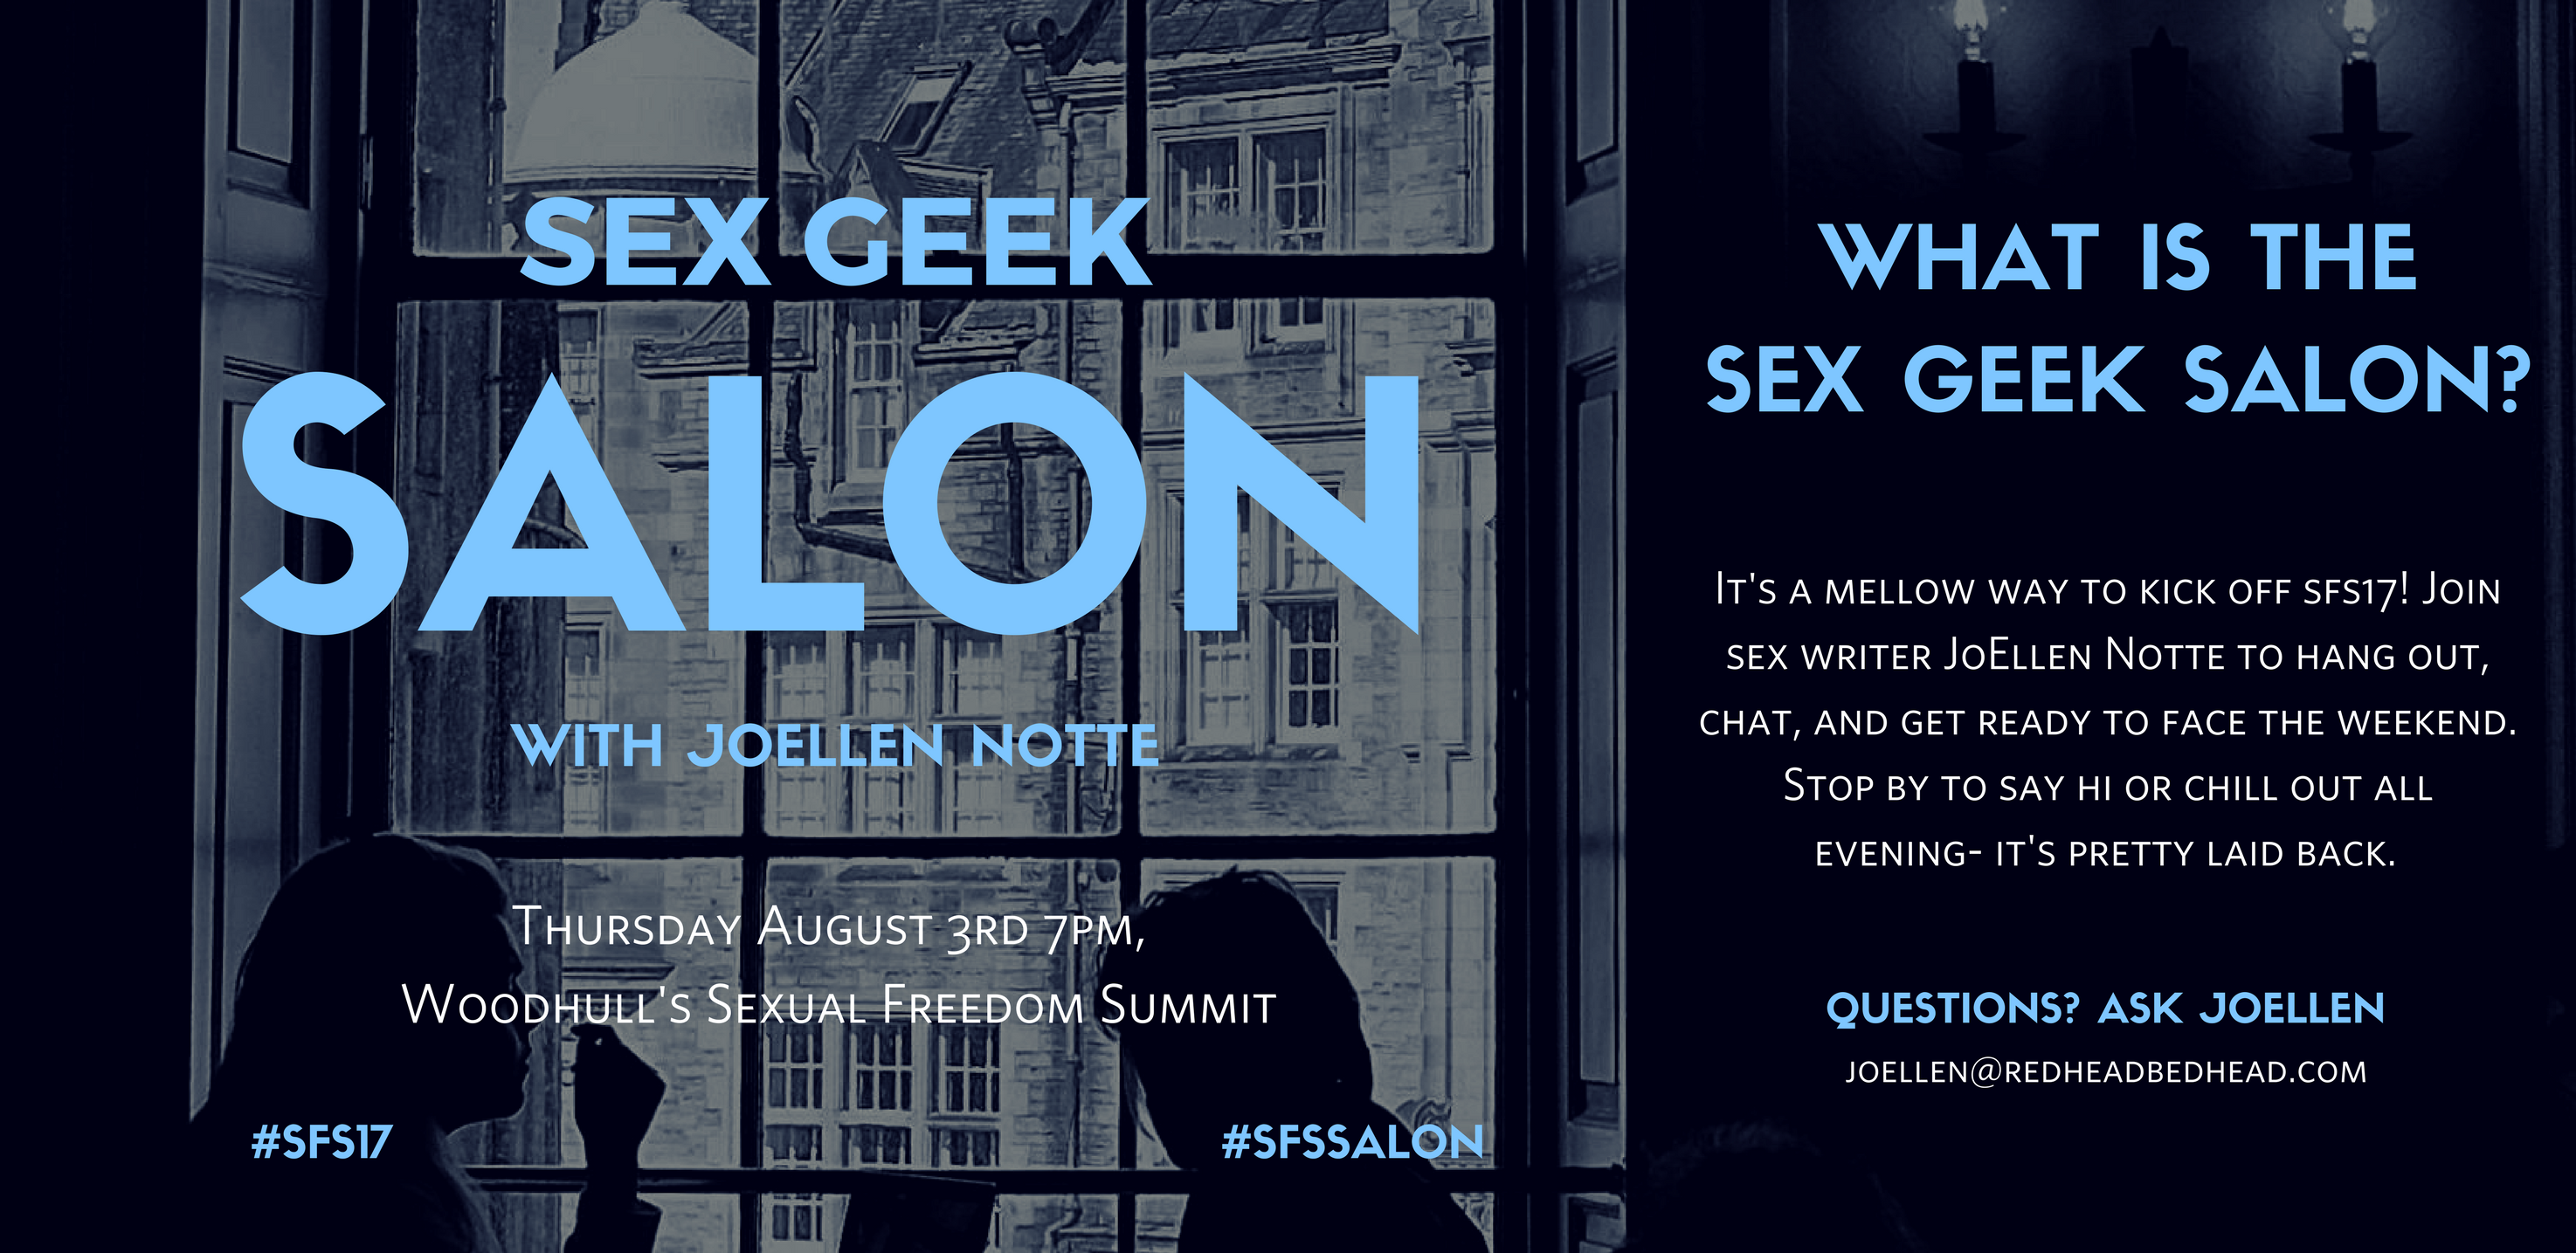 Graphic reading "Sex Geek Salon with JoEllen Notte, Thursday August 3rd 7pm, Woodhull's Sexual Freedom Summit, WHAT IS THE SEX GEEK SALON? It's a mellow way to kick off sfs17! Join sex writer JoEllen Notte to hang out, chat, and get ready to face the weekend. Stop by to say hi or chill out all evening- it's pretty laid back. 